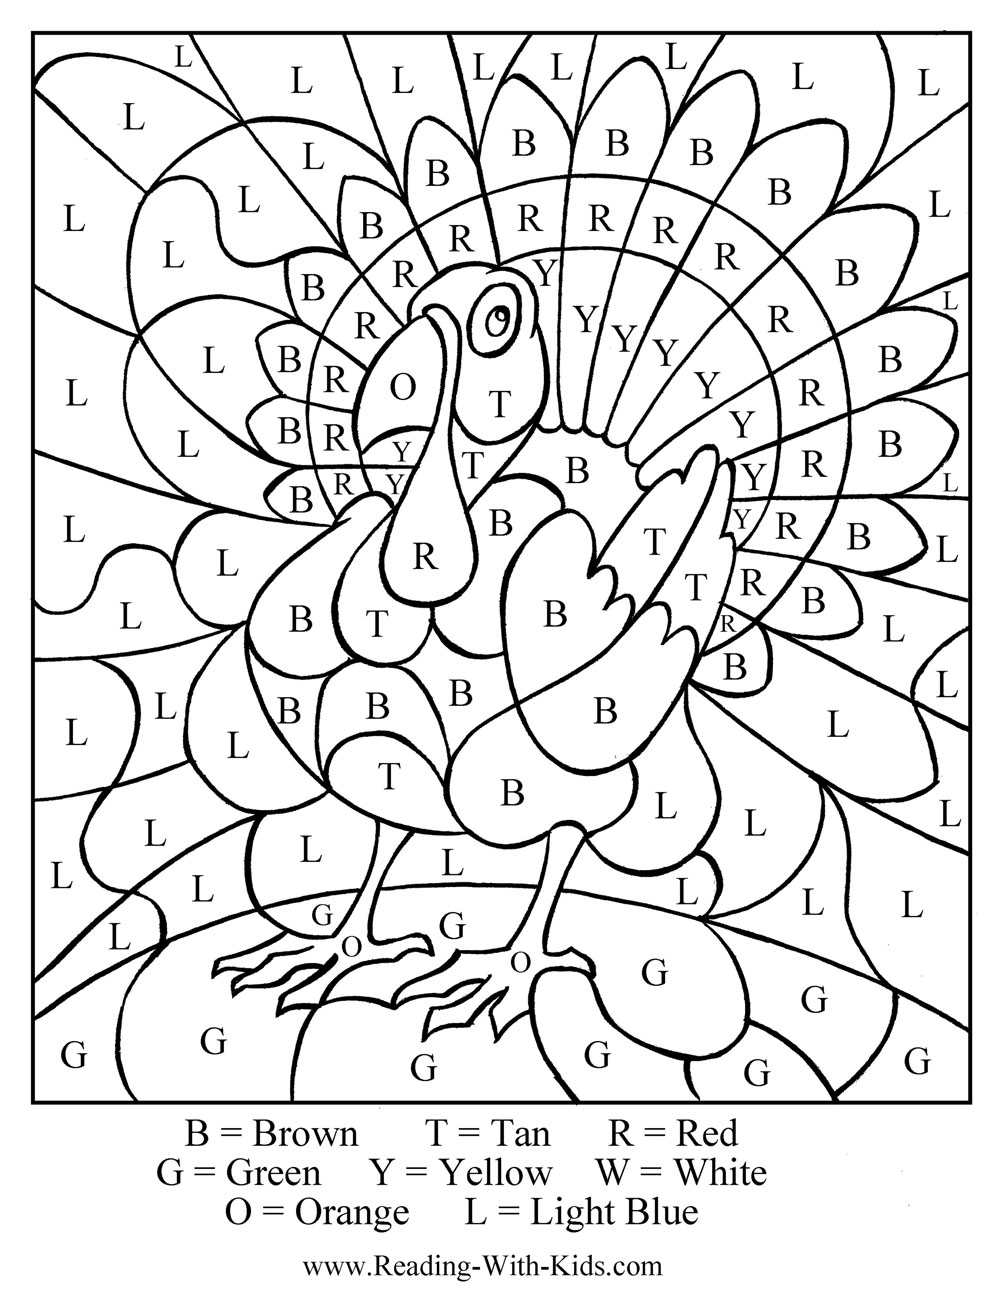 Free Thanksgiving Coloring Pages Games Printables thankgiving Between The Kids